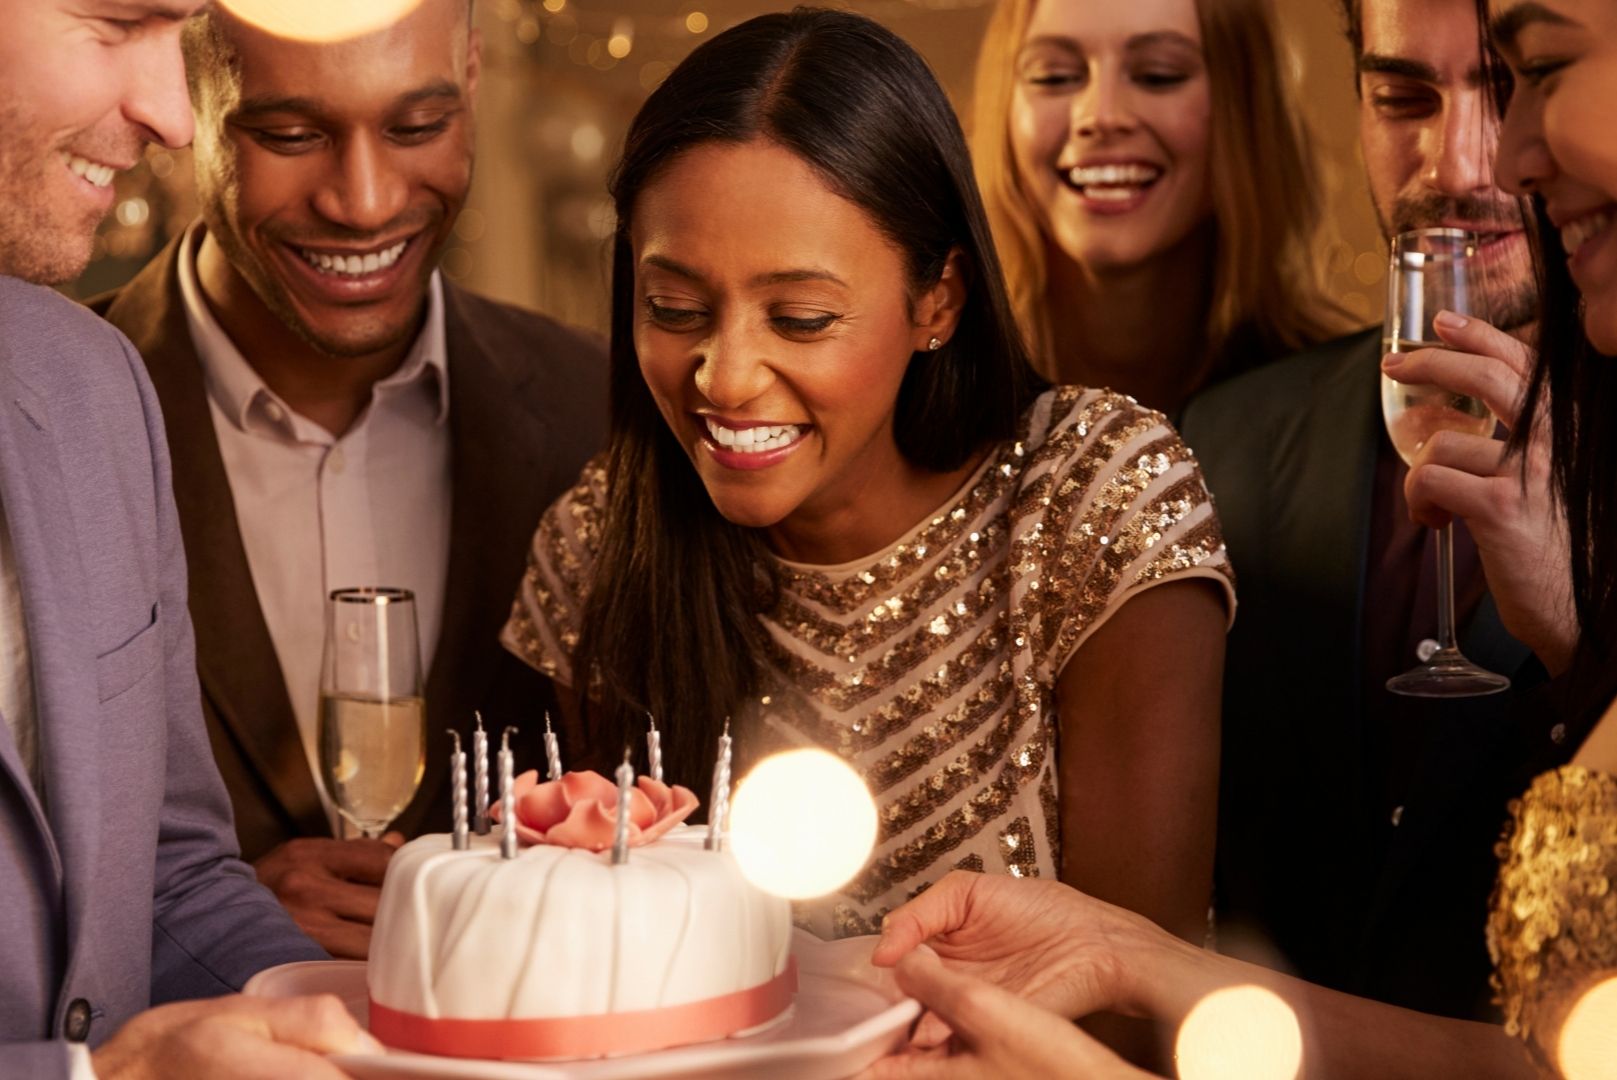 Group of friends presenting a young woman with a birthday cake